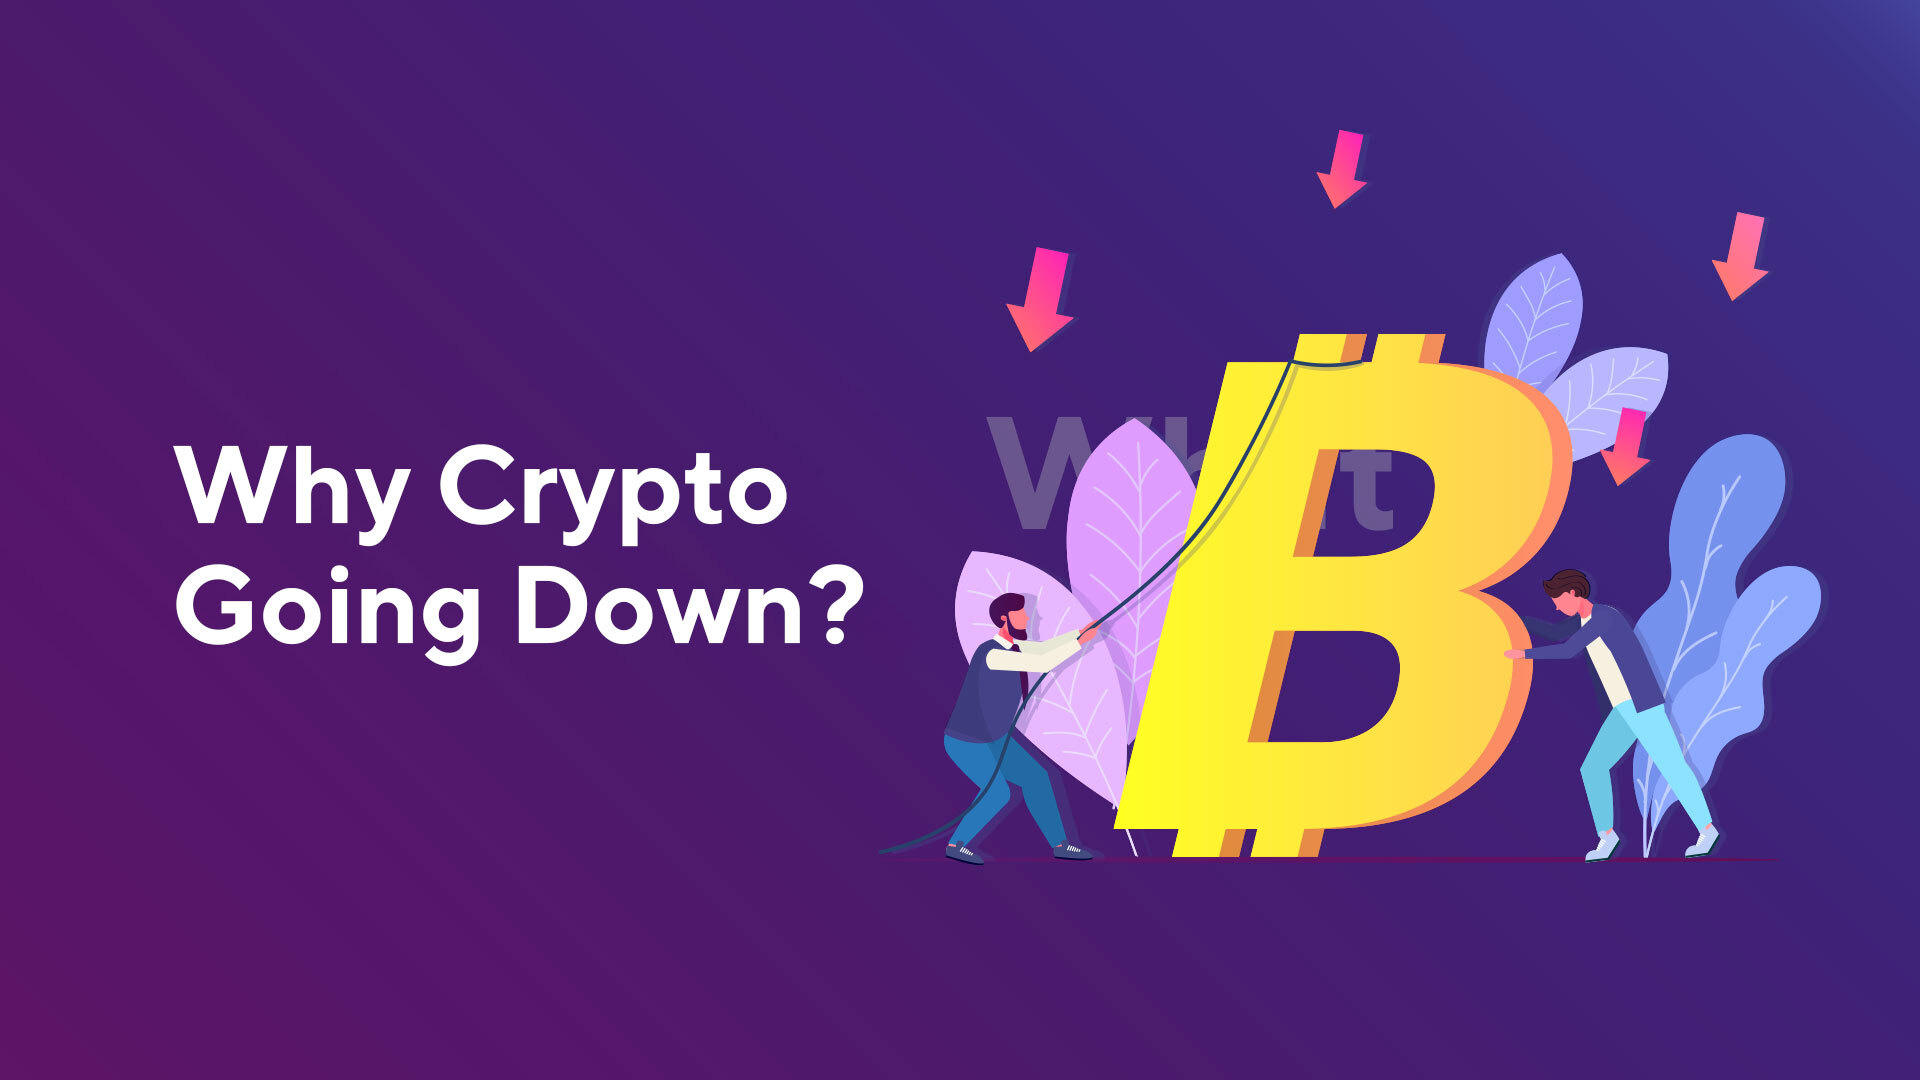 how long will crypto be down